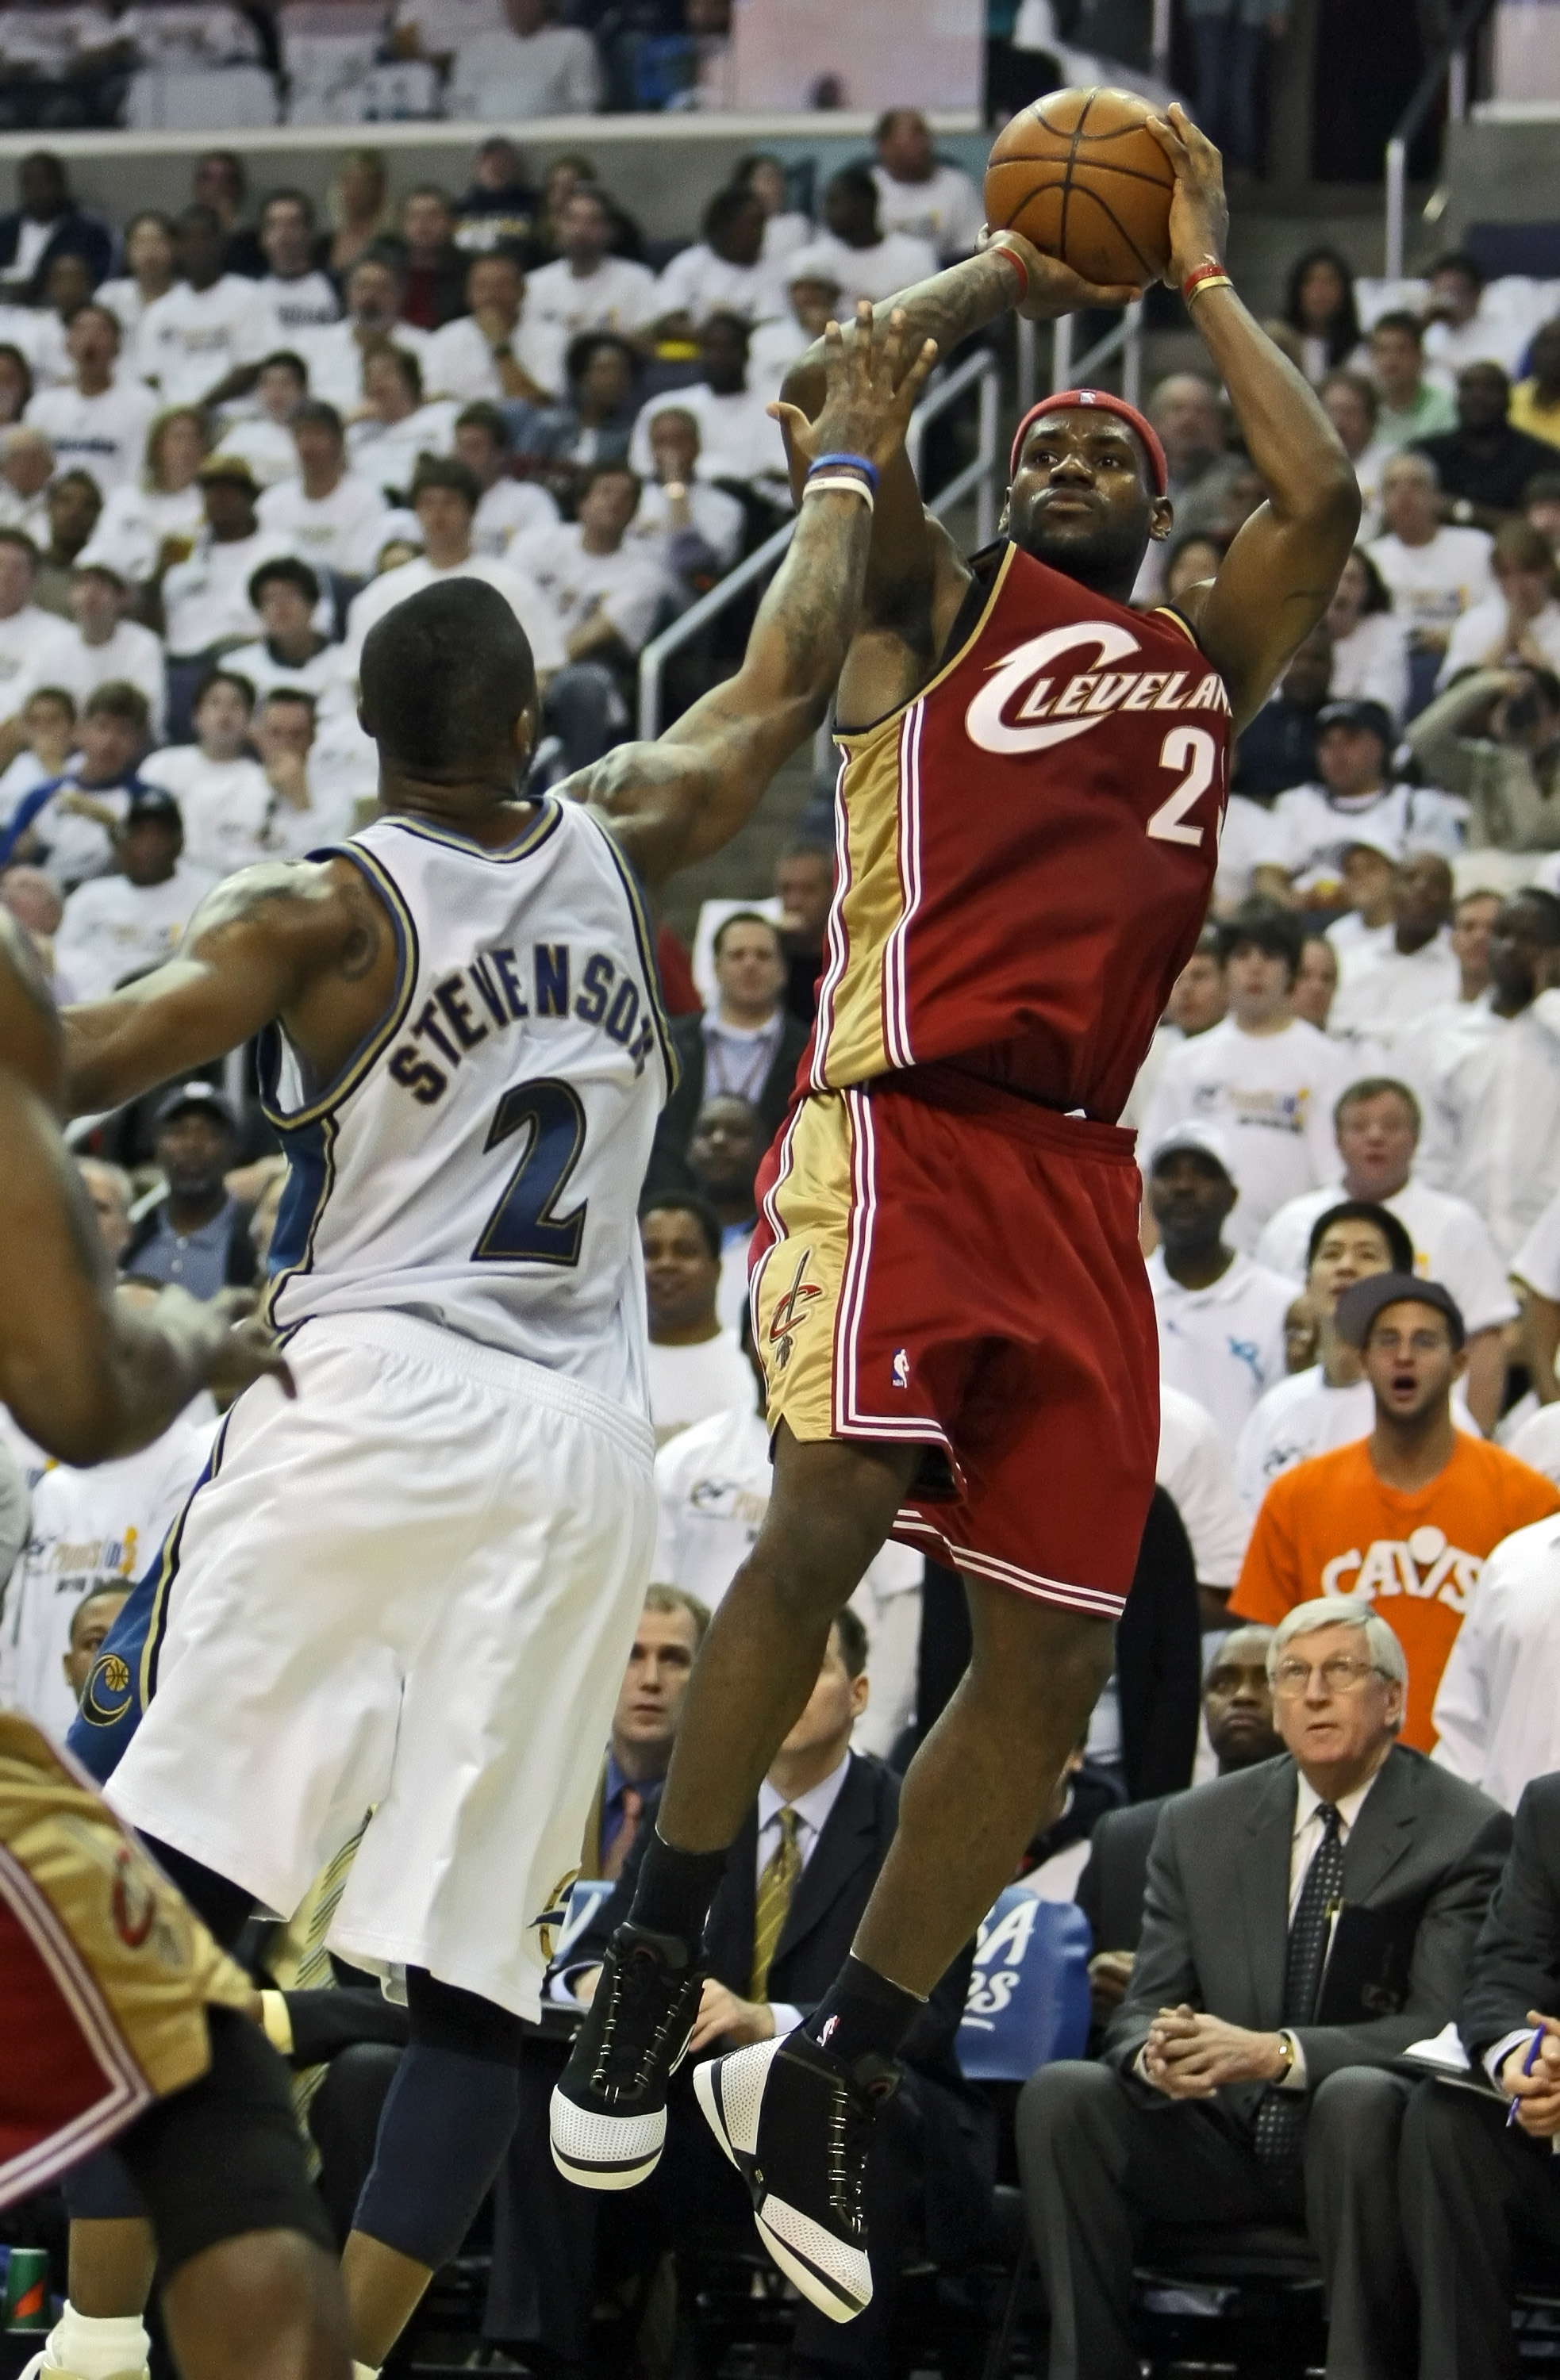 WASHINGTON - APRIL 27: LeBron James #23 of the Cleveland Cavaliers puts up a jump shot over DeShawn Stevenson #2 of the Washington Wizards in Game Four of the Eastern Conference Quarterfinals during the 2008 NBA Playoffs at the Verizon Center on April 27,